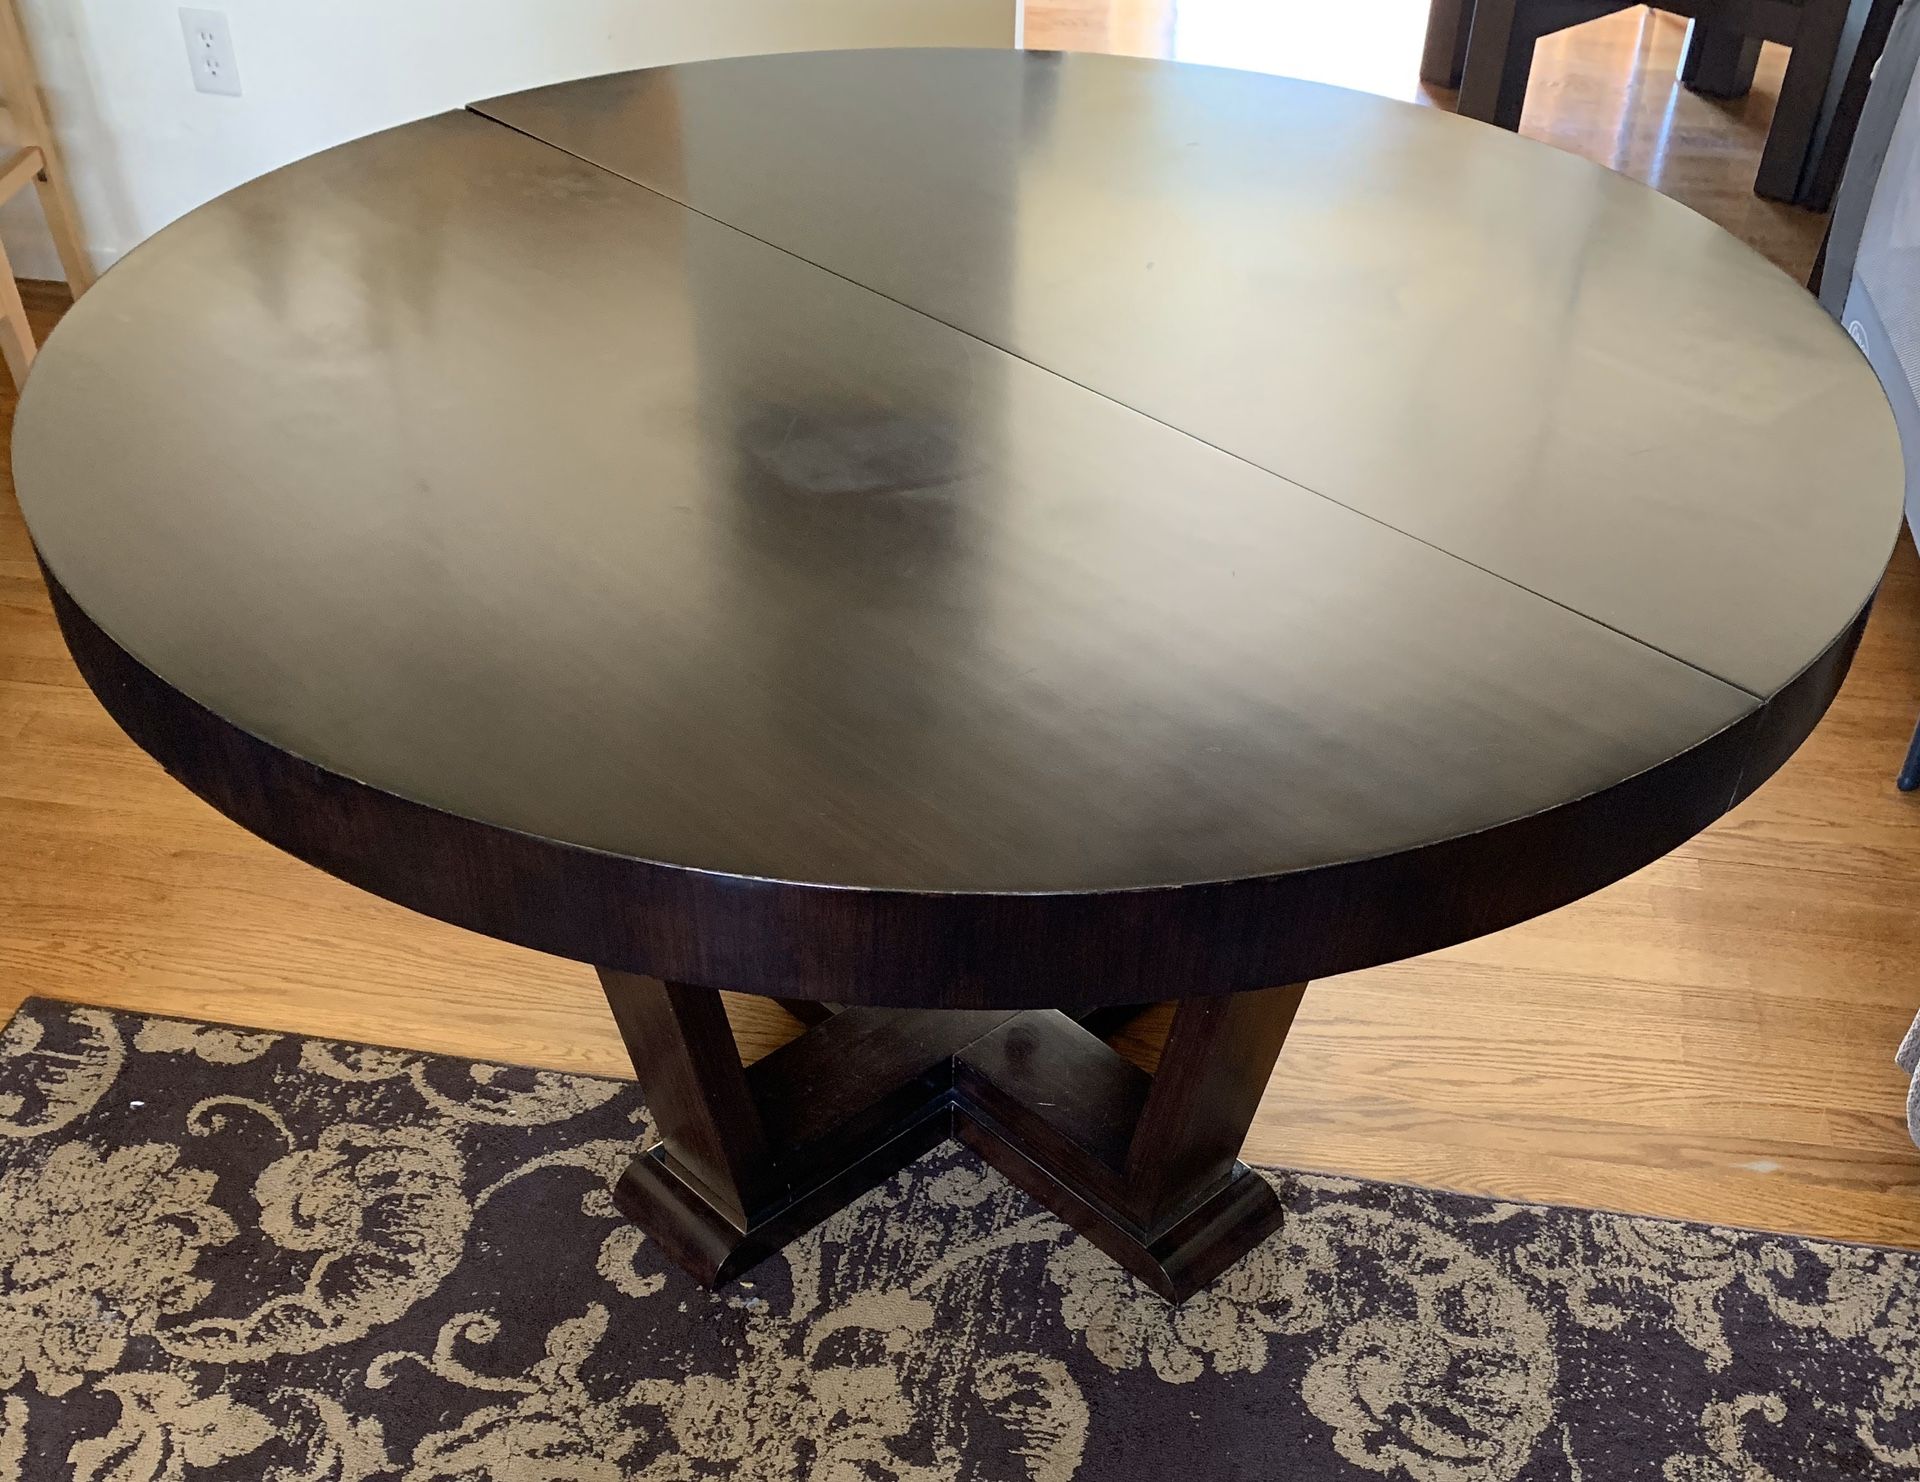 Large 54” Round Sturdy Dining Kitchen Table